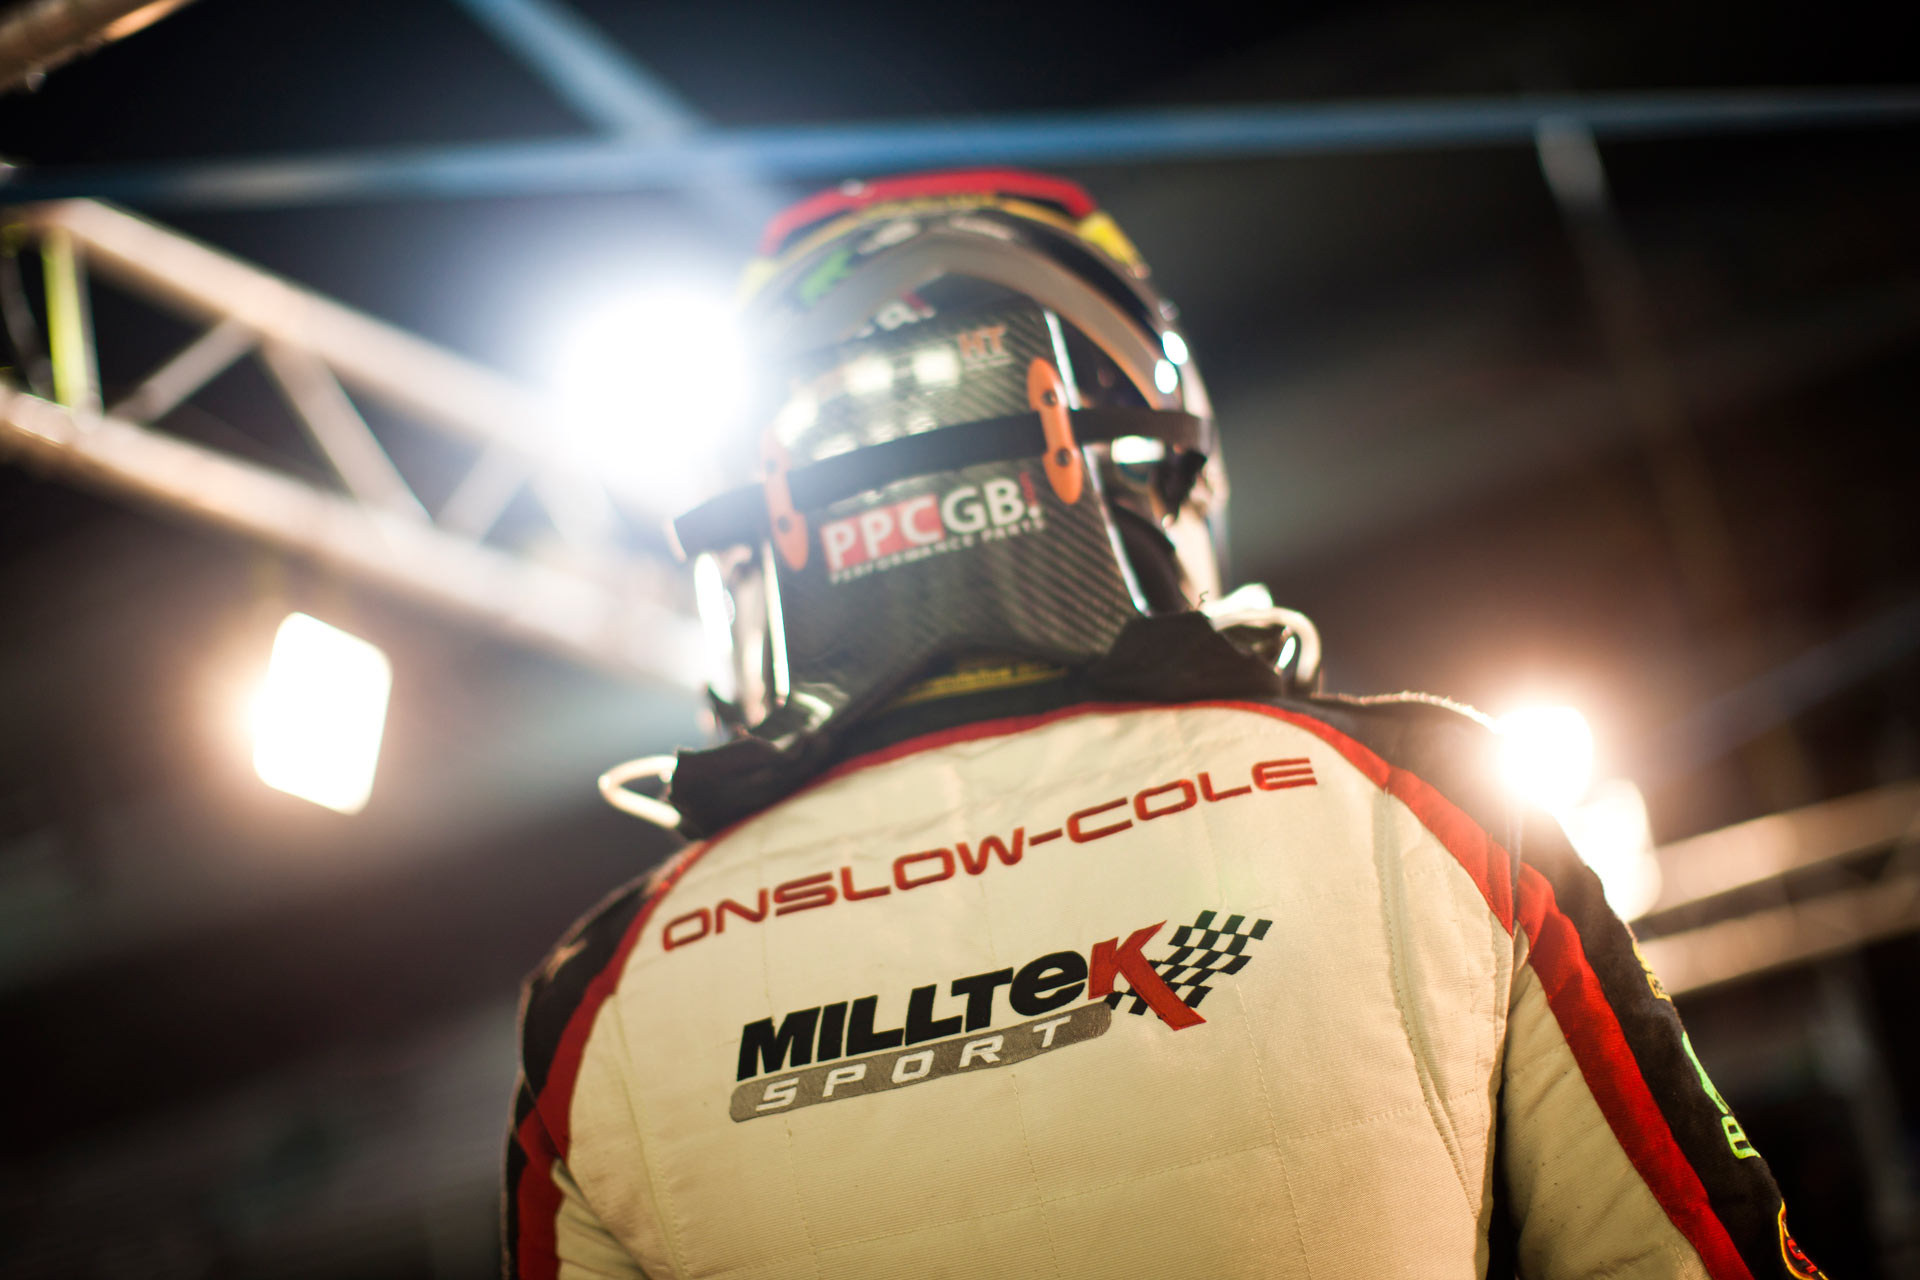 Tom Onslow-Cole at the Dubai 24H race in 2014 where he drove the Milltek Sport Golf TDi Endurance racer to victory